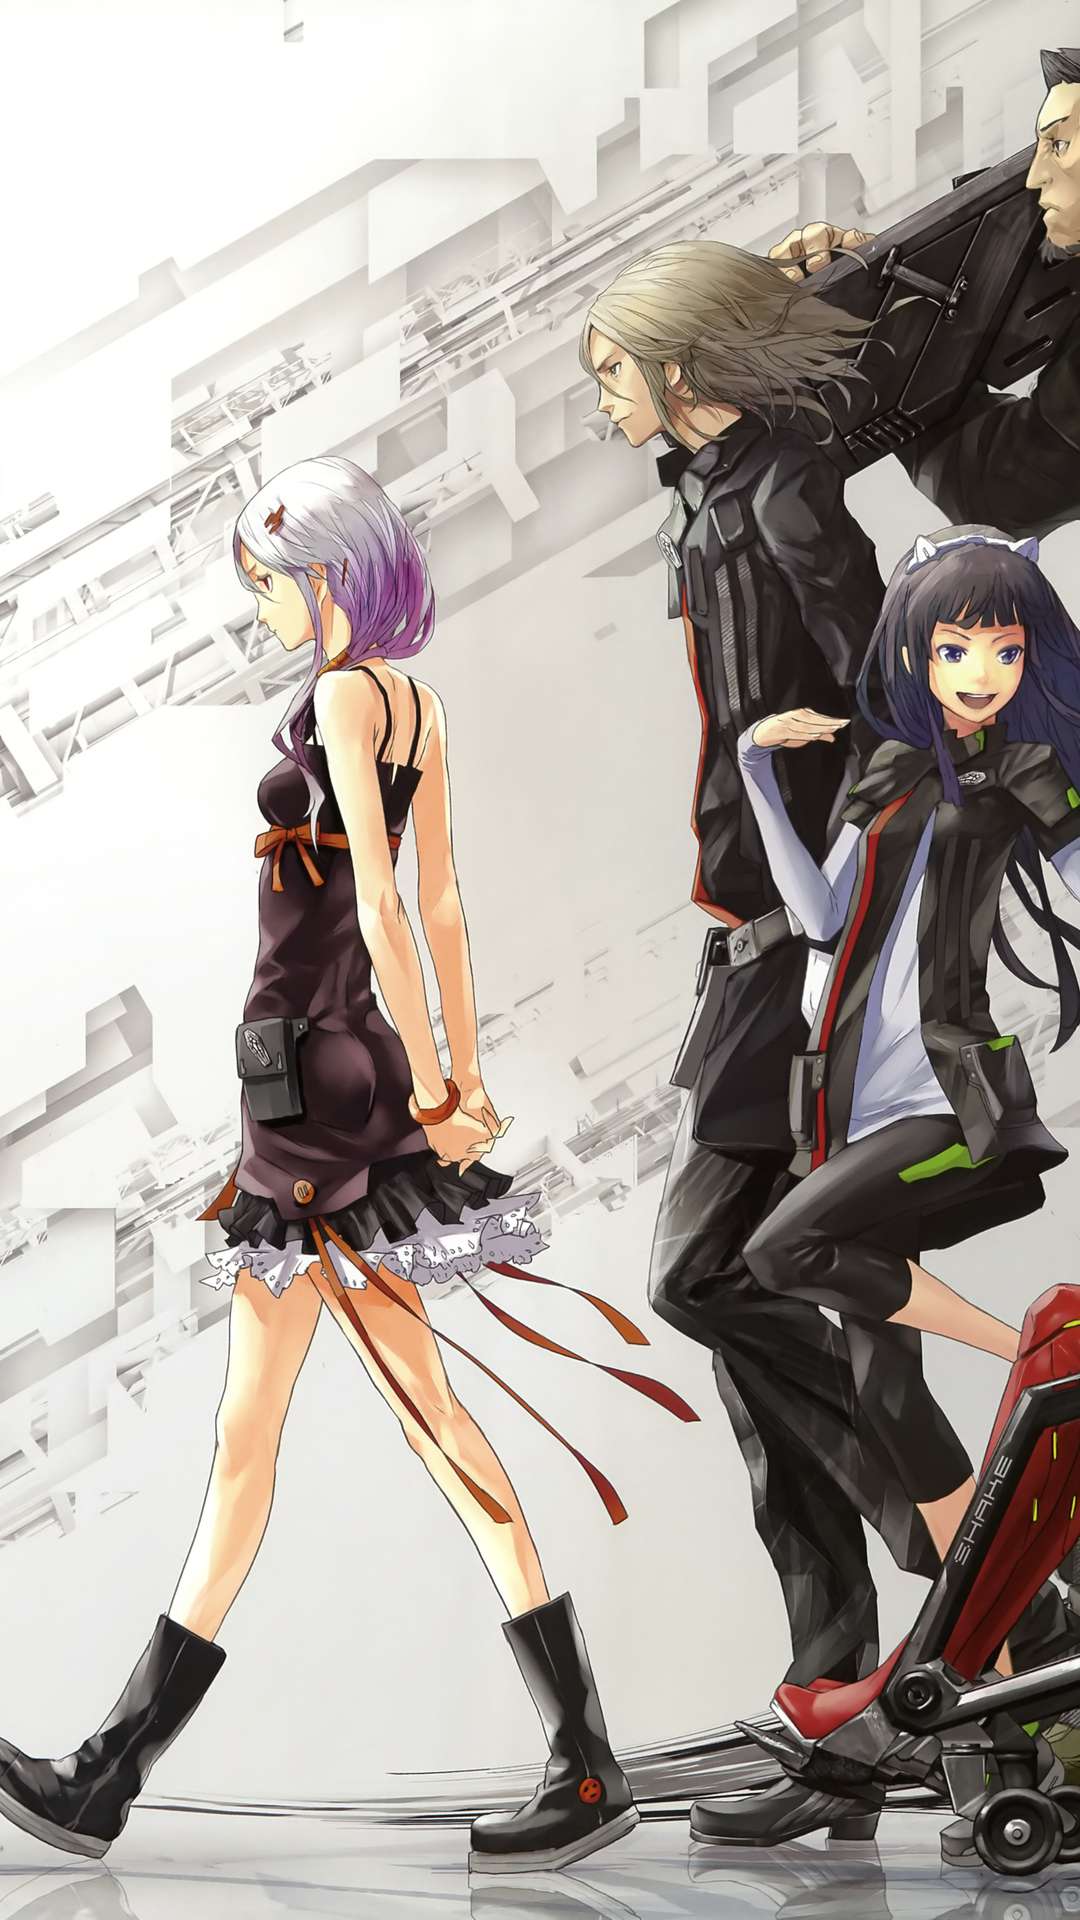 12 Guilty Crown Wallpapers For Iphone And Android By Kathleen Norton Md